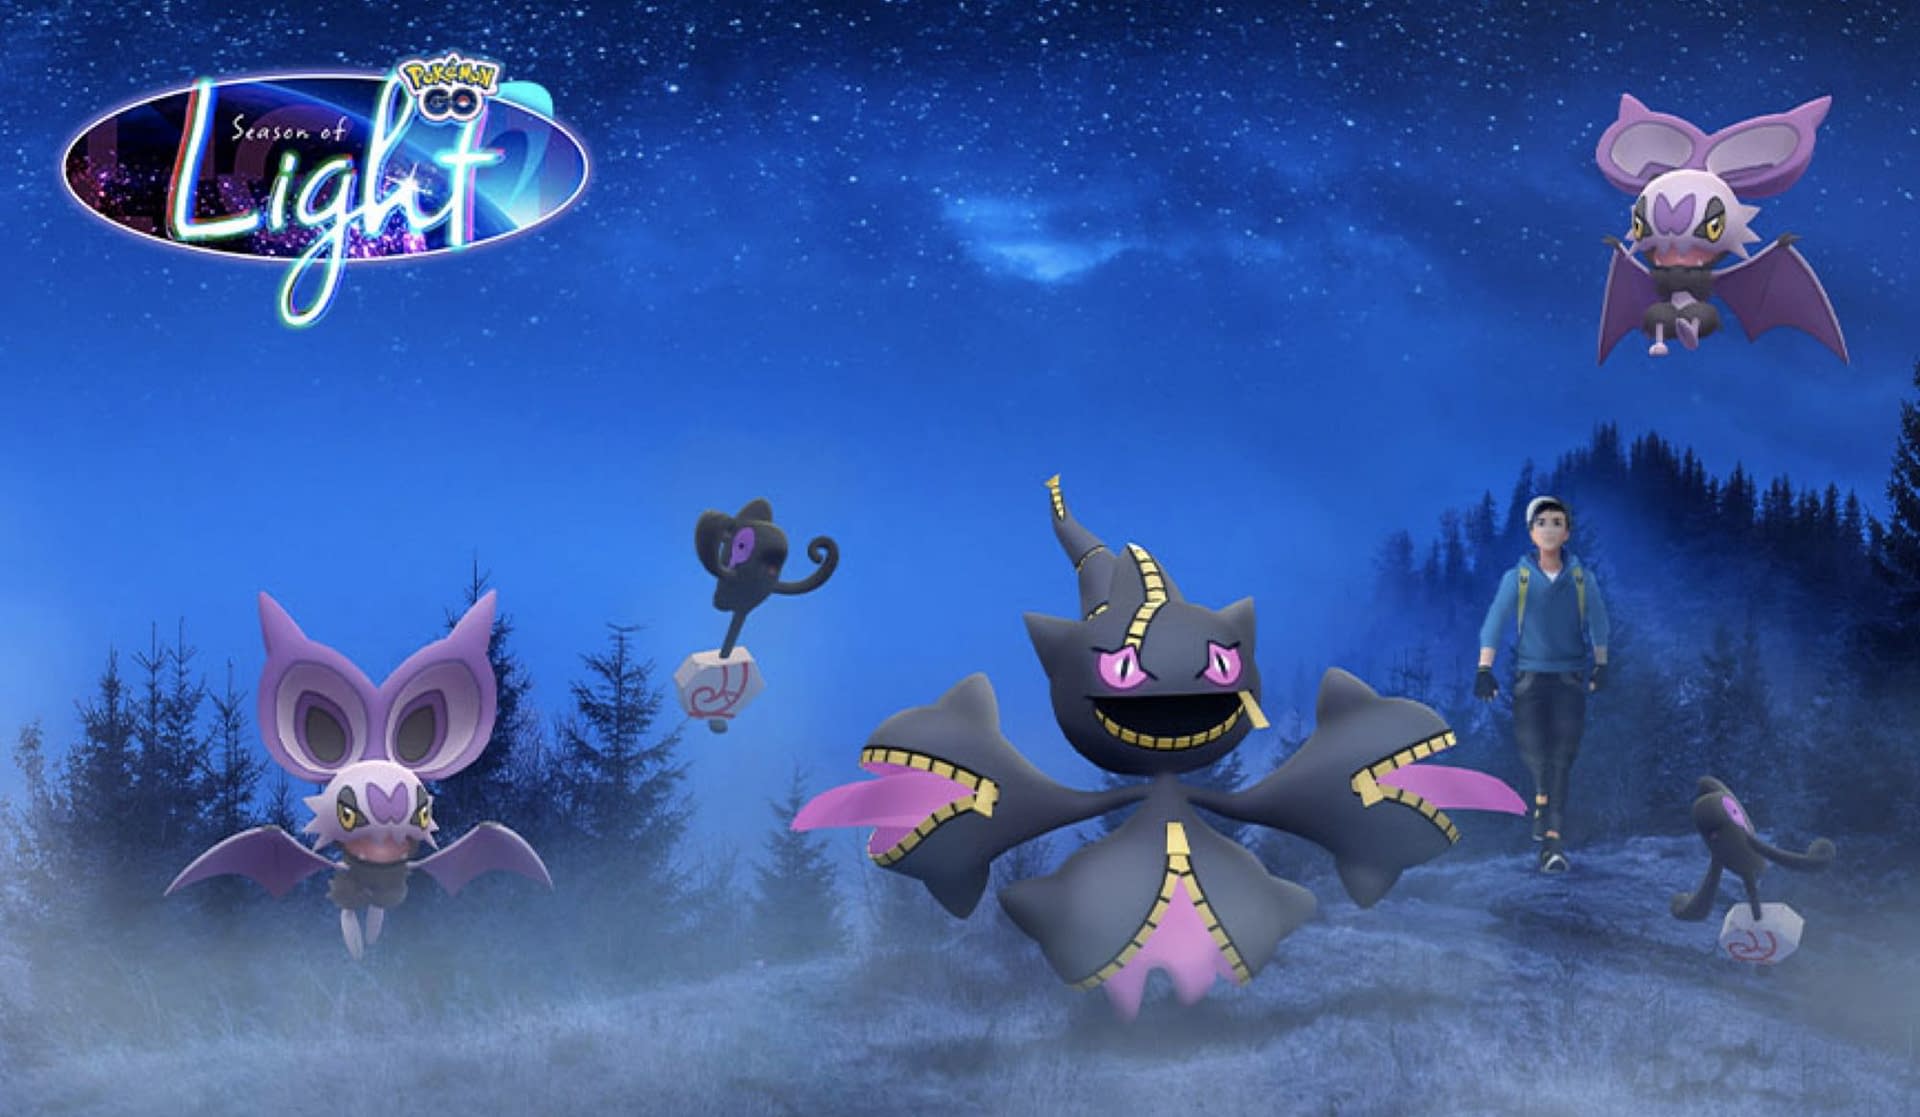 Mega Banette Raid, trying to add 10 Adding both makes it easier to invite  all of you! 6105 4217 2428 and 1296 7789 0317 : r/PokemonGoRaids